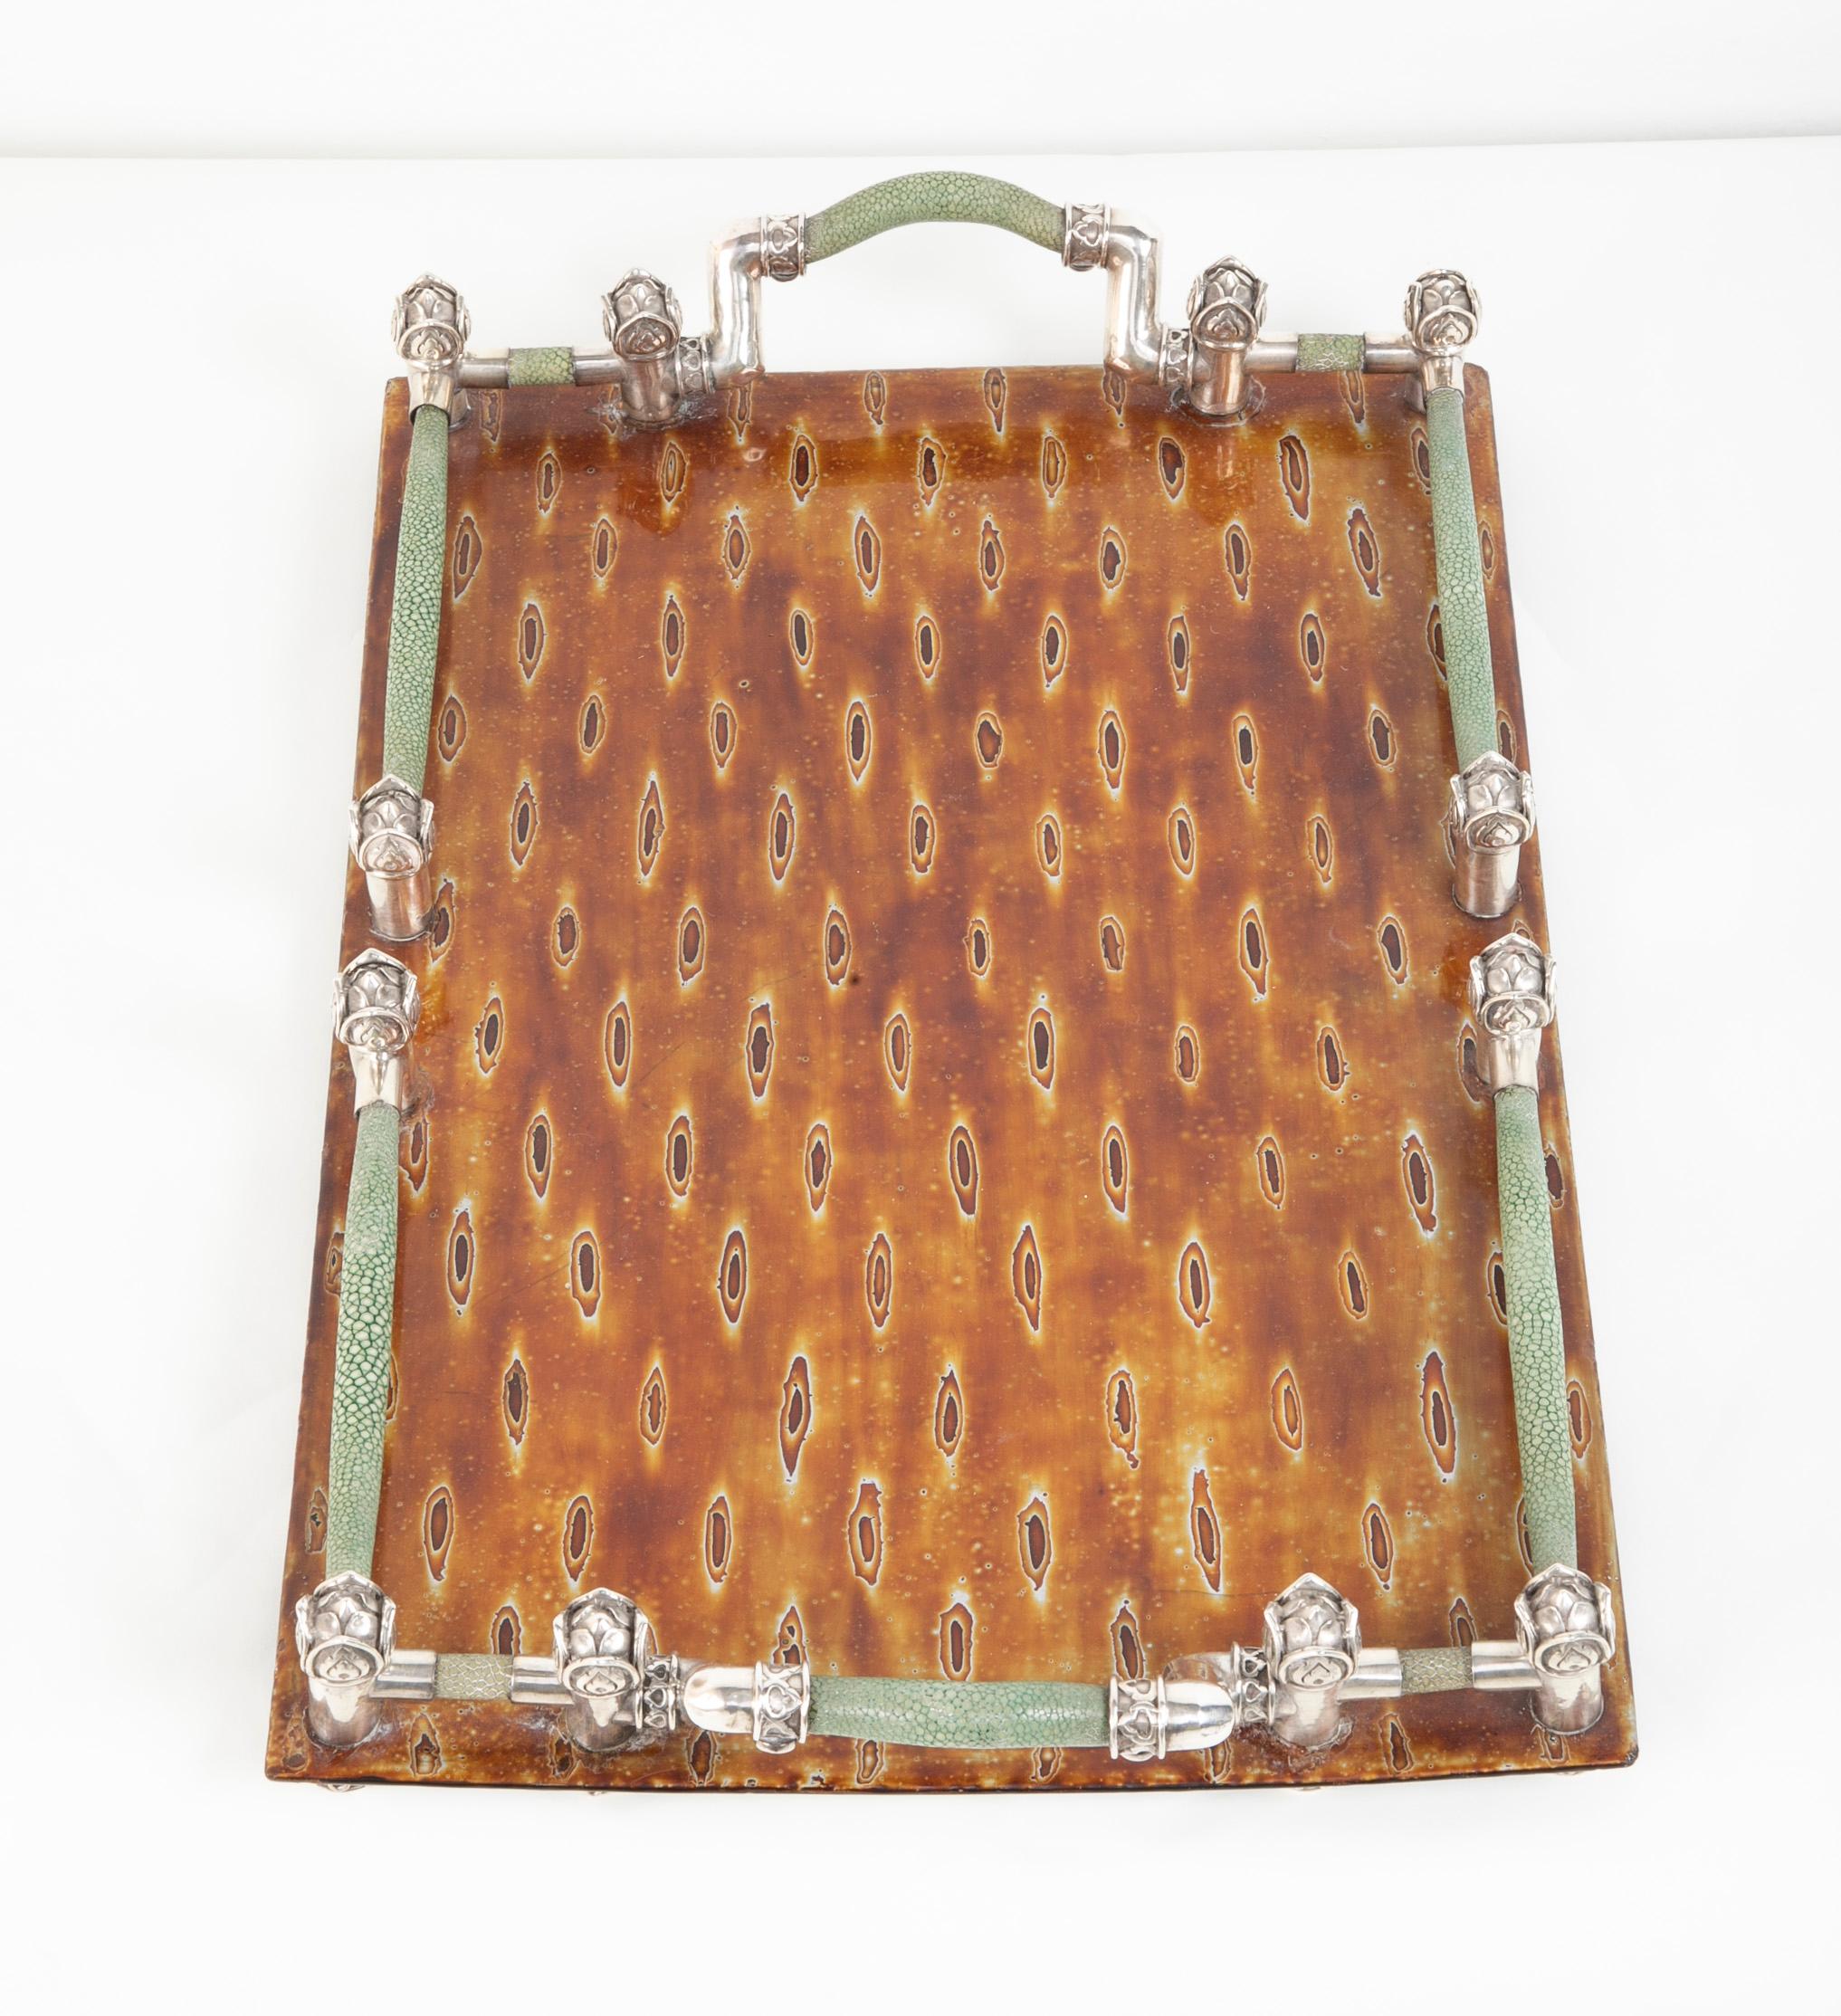 Japanese Lacquer Tray with Shagreen and Silver Gallery 4